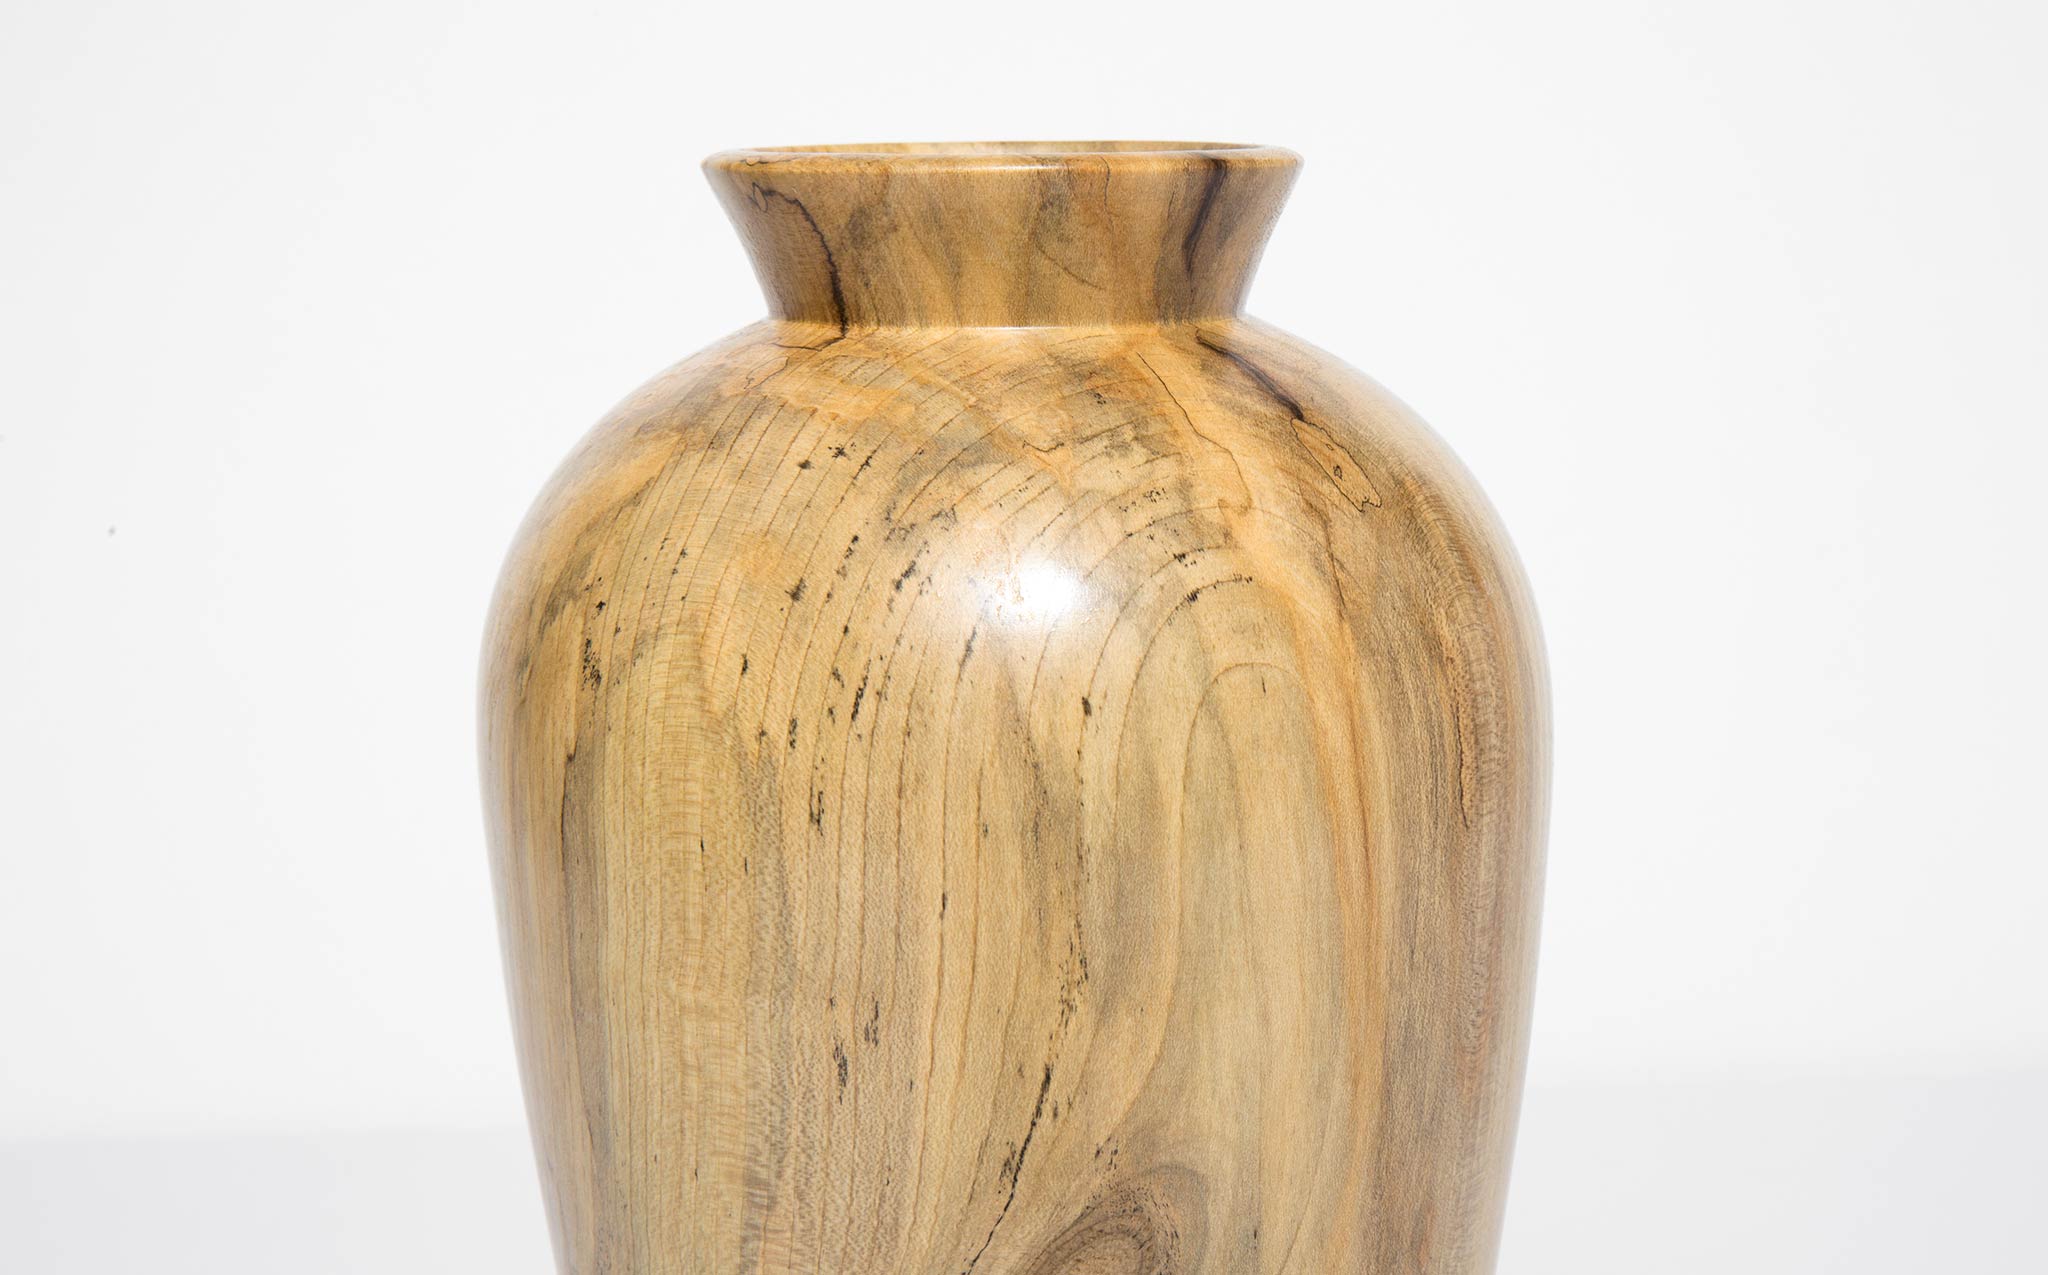 Bruce Perlmutter Hand Lathed Holly Vessel